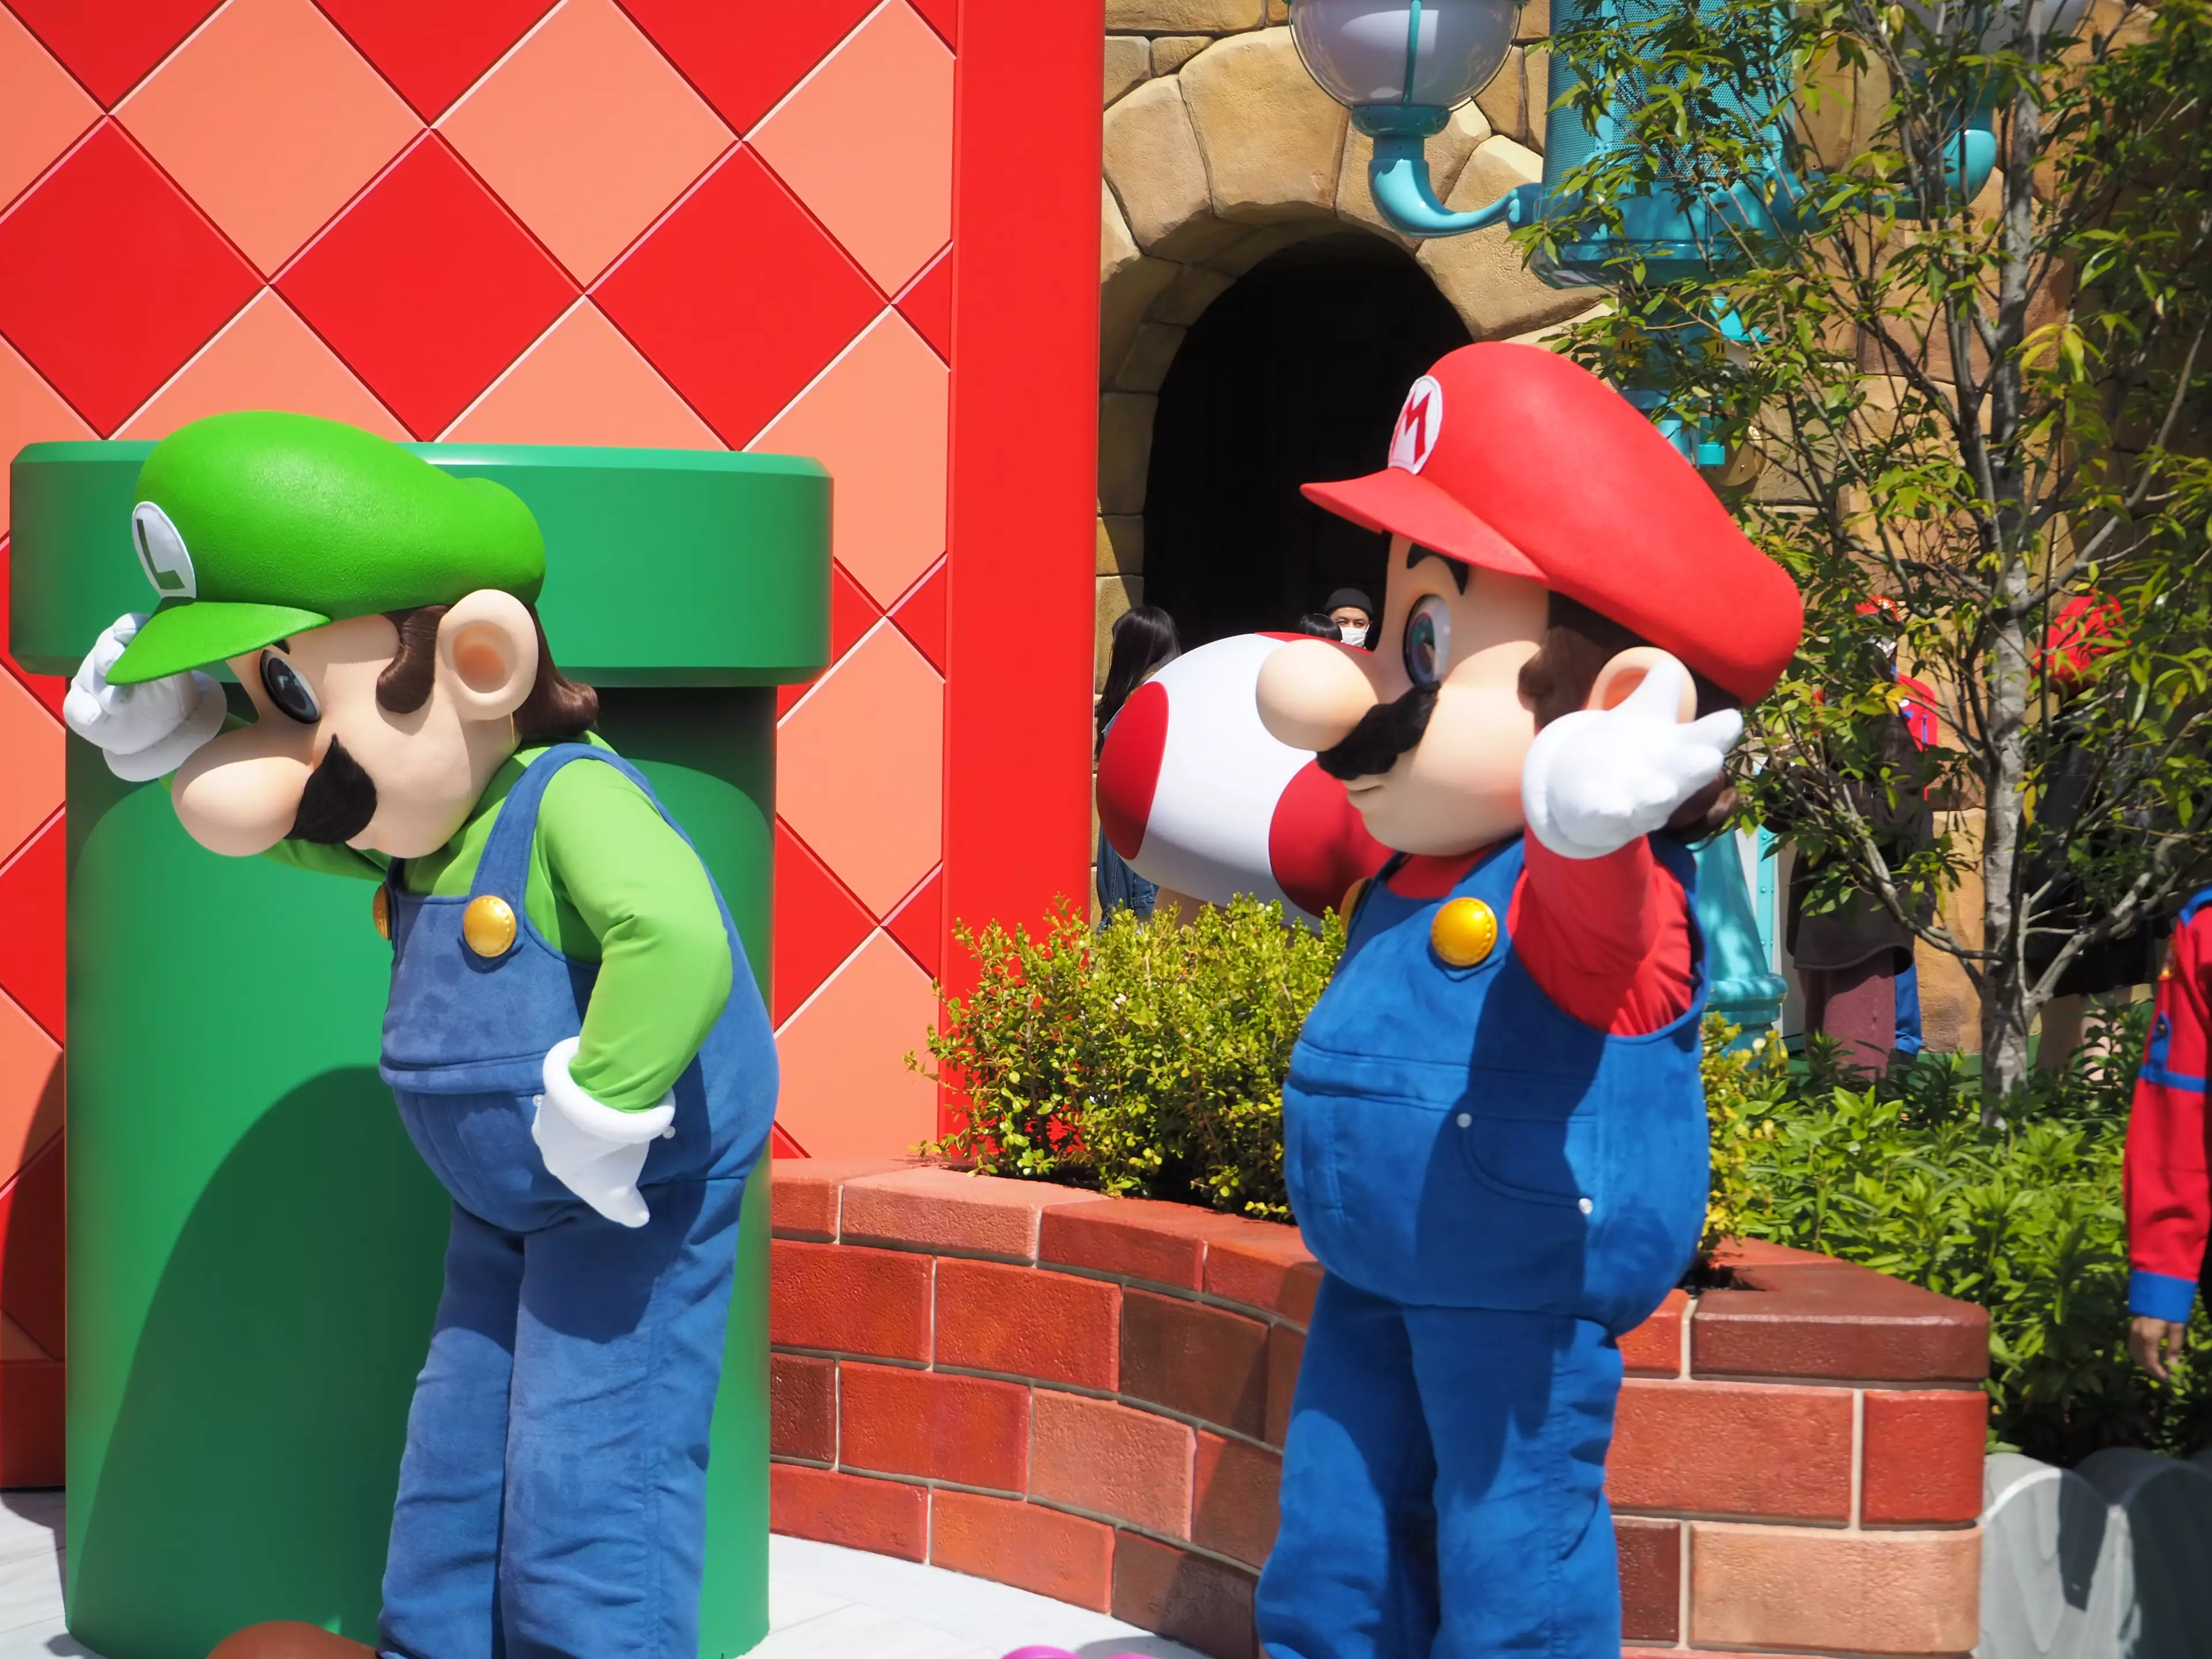 Mario and Luigi, as well as Peach and Toad, are in the park to meet /